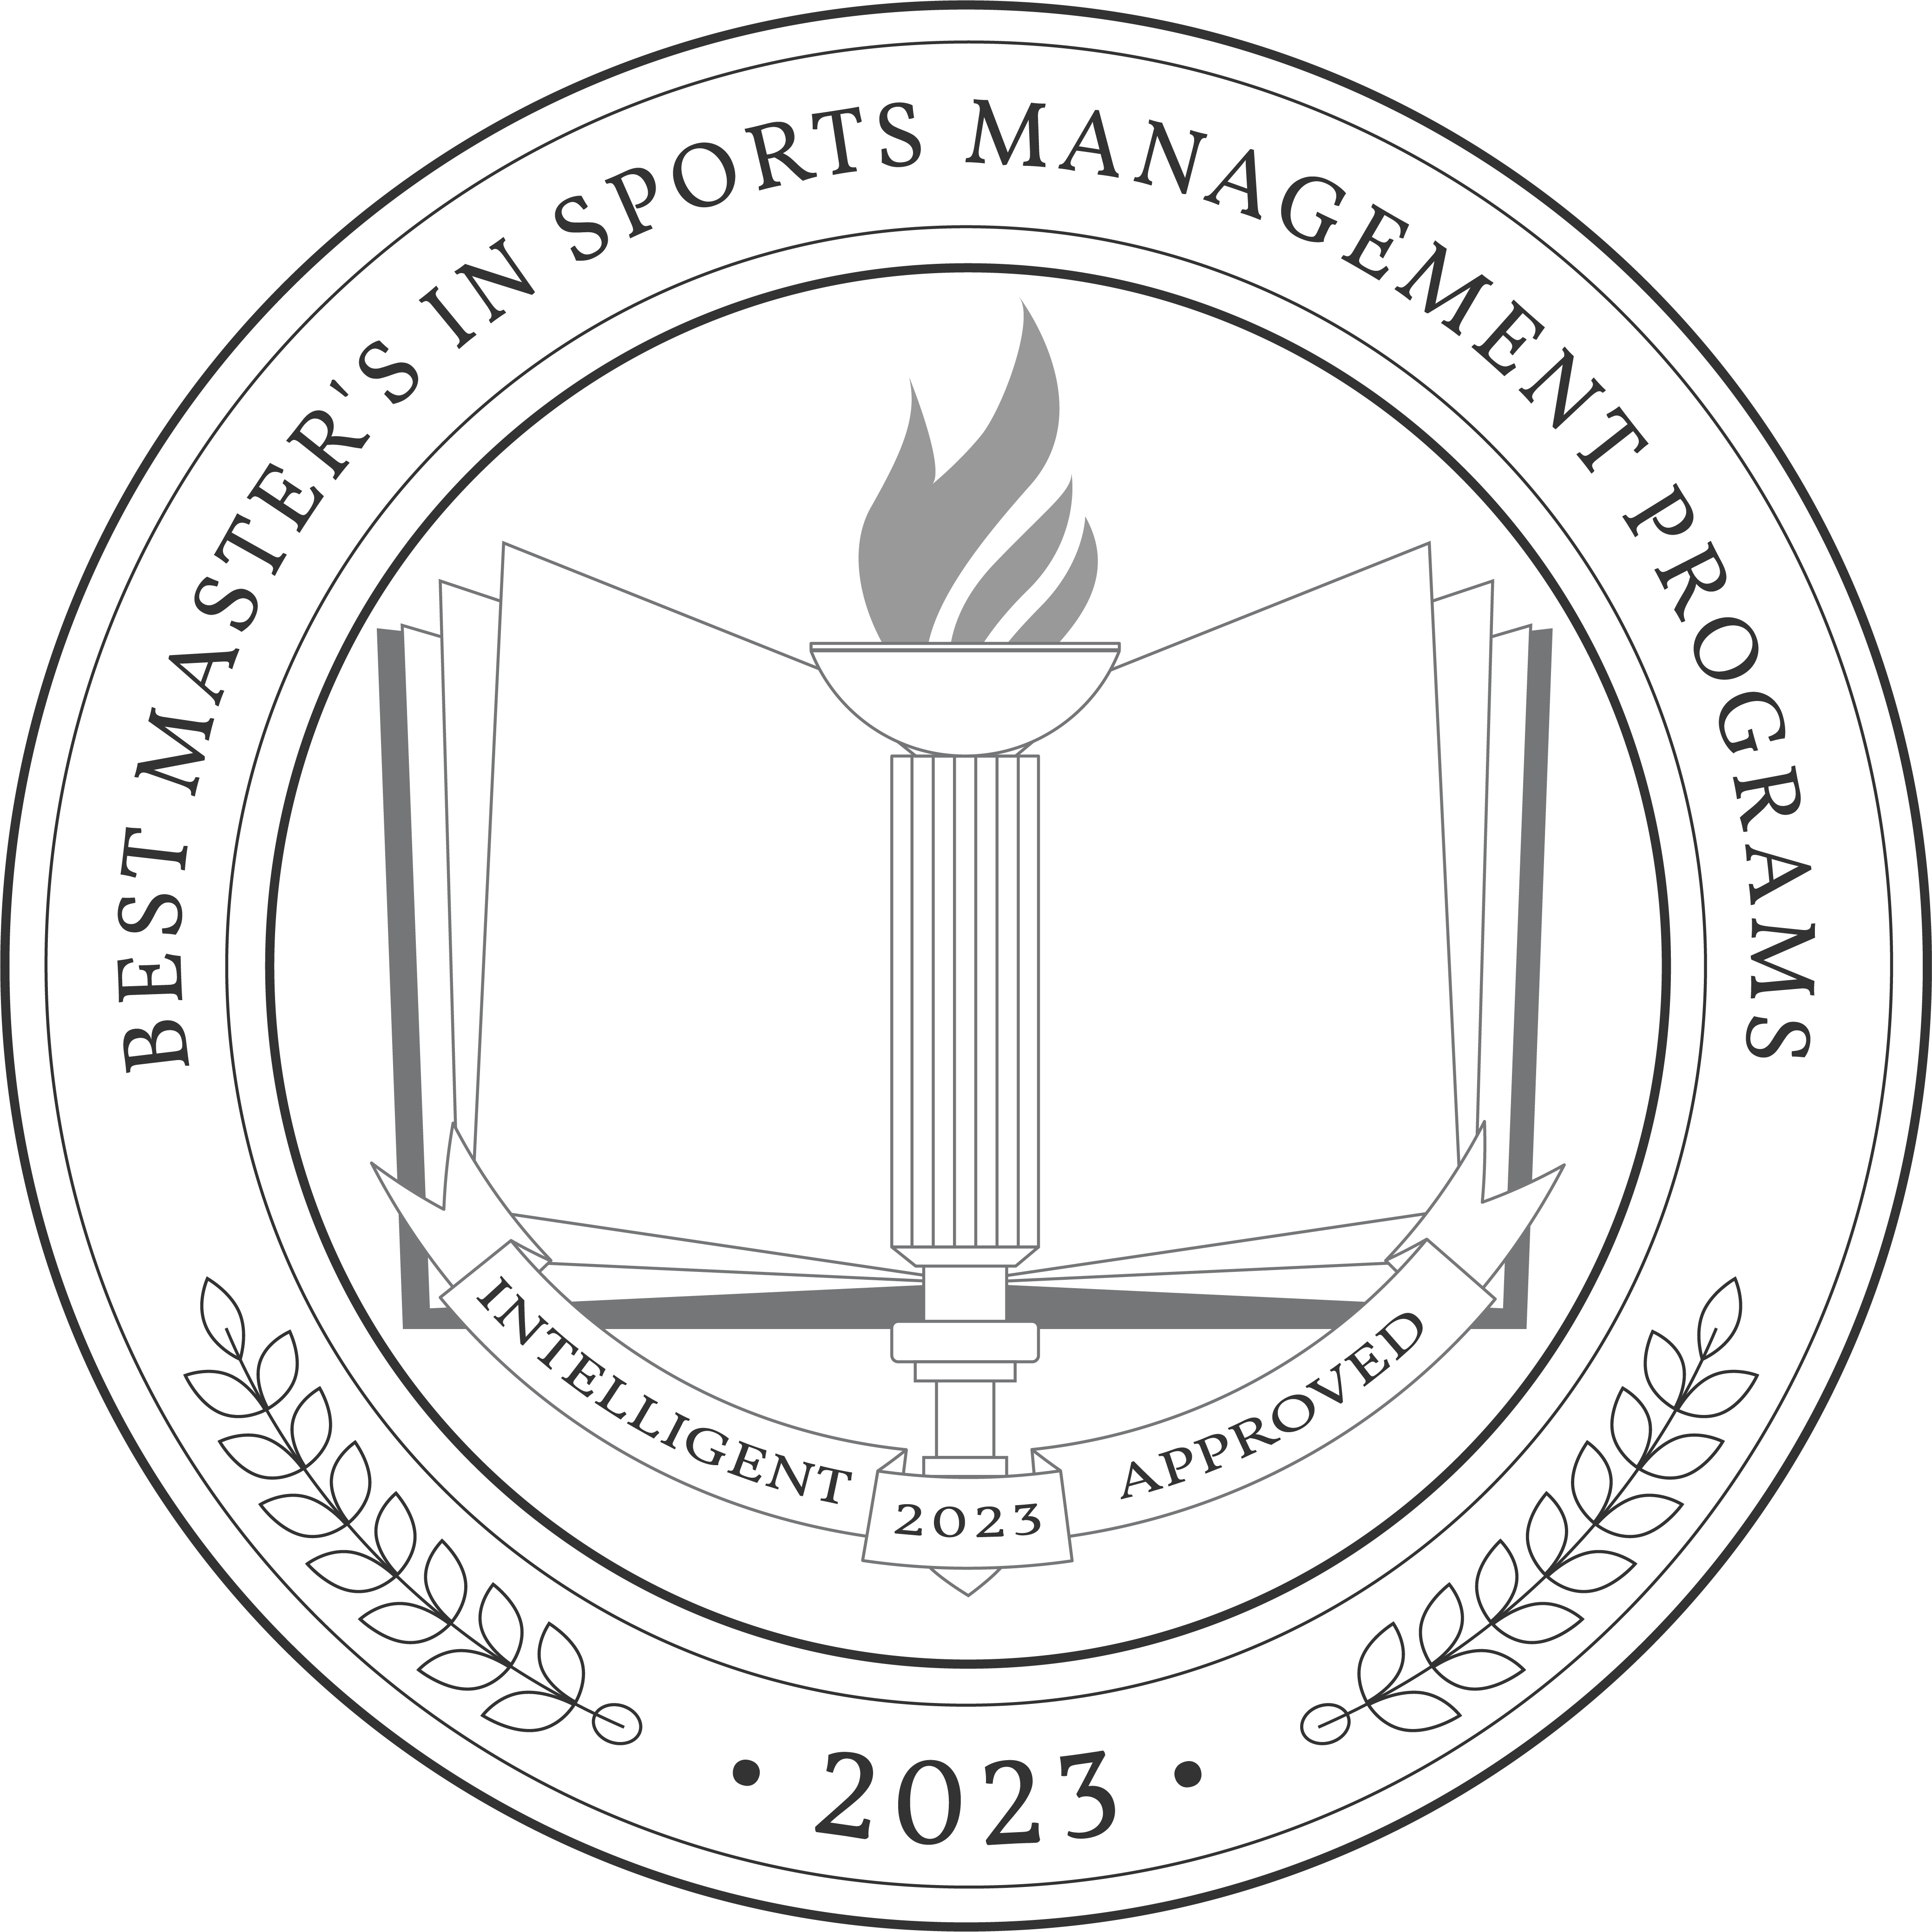 Best Master's in Sports Management Programs 2023